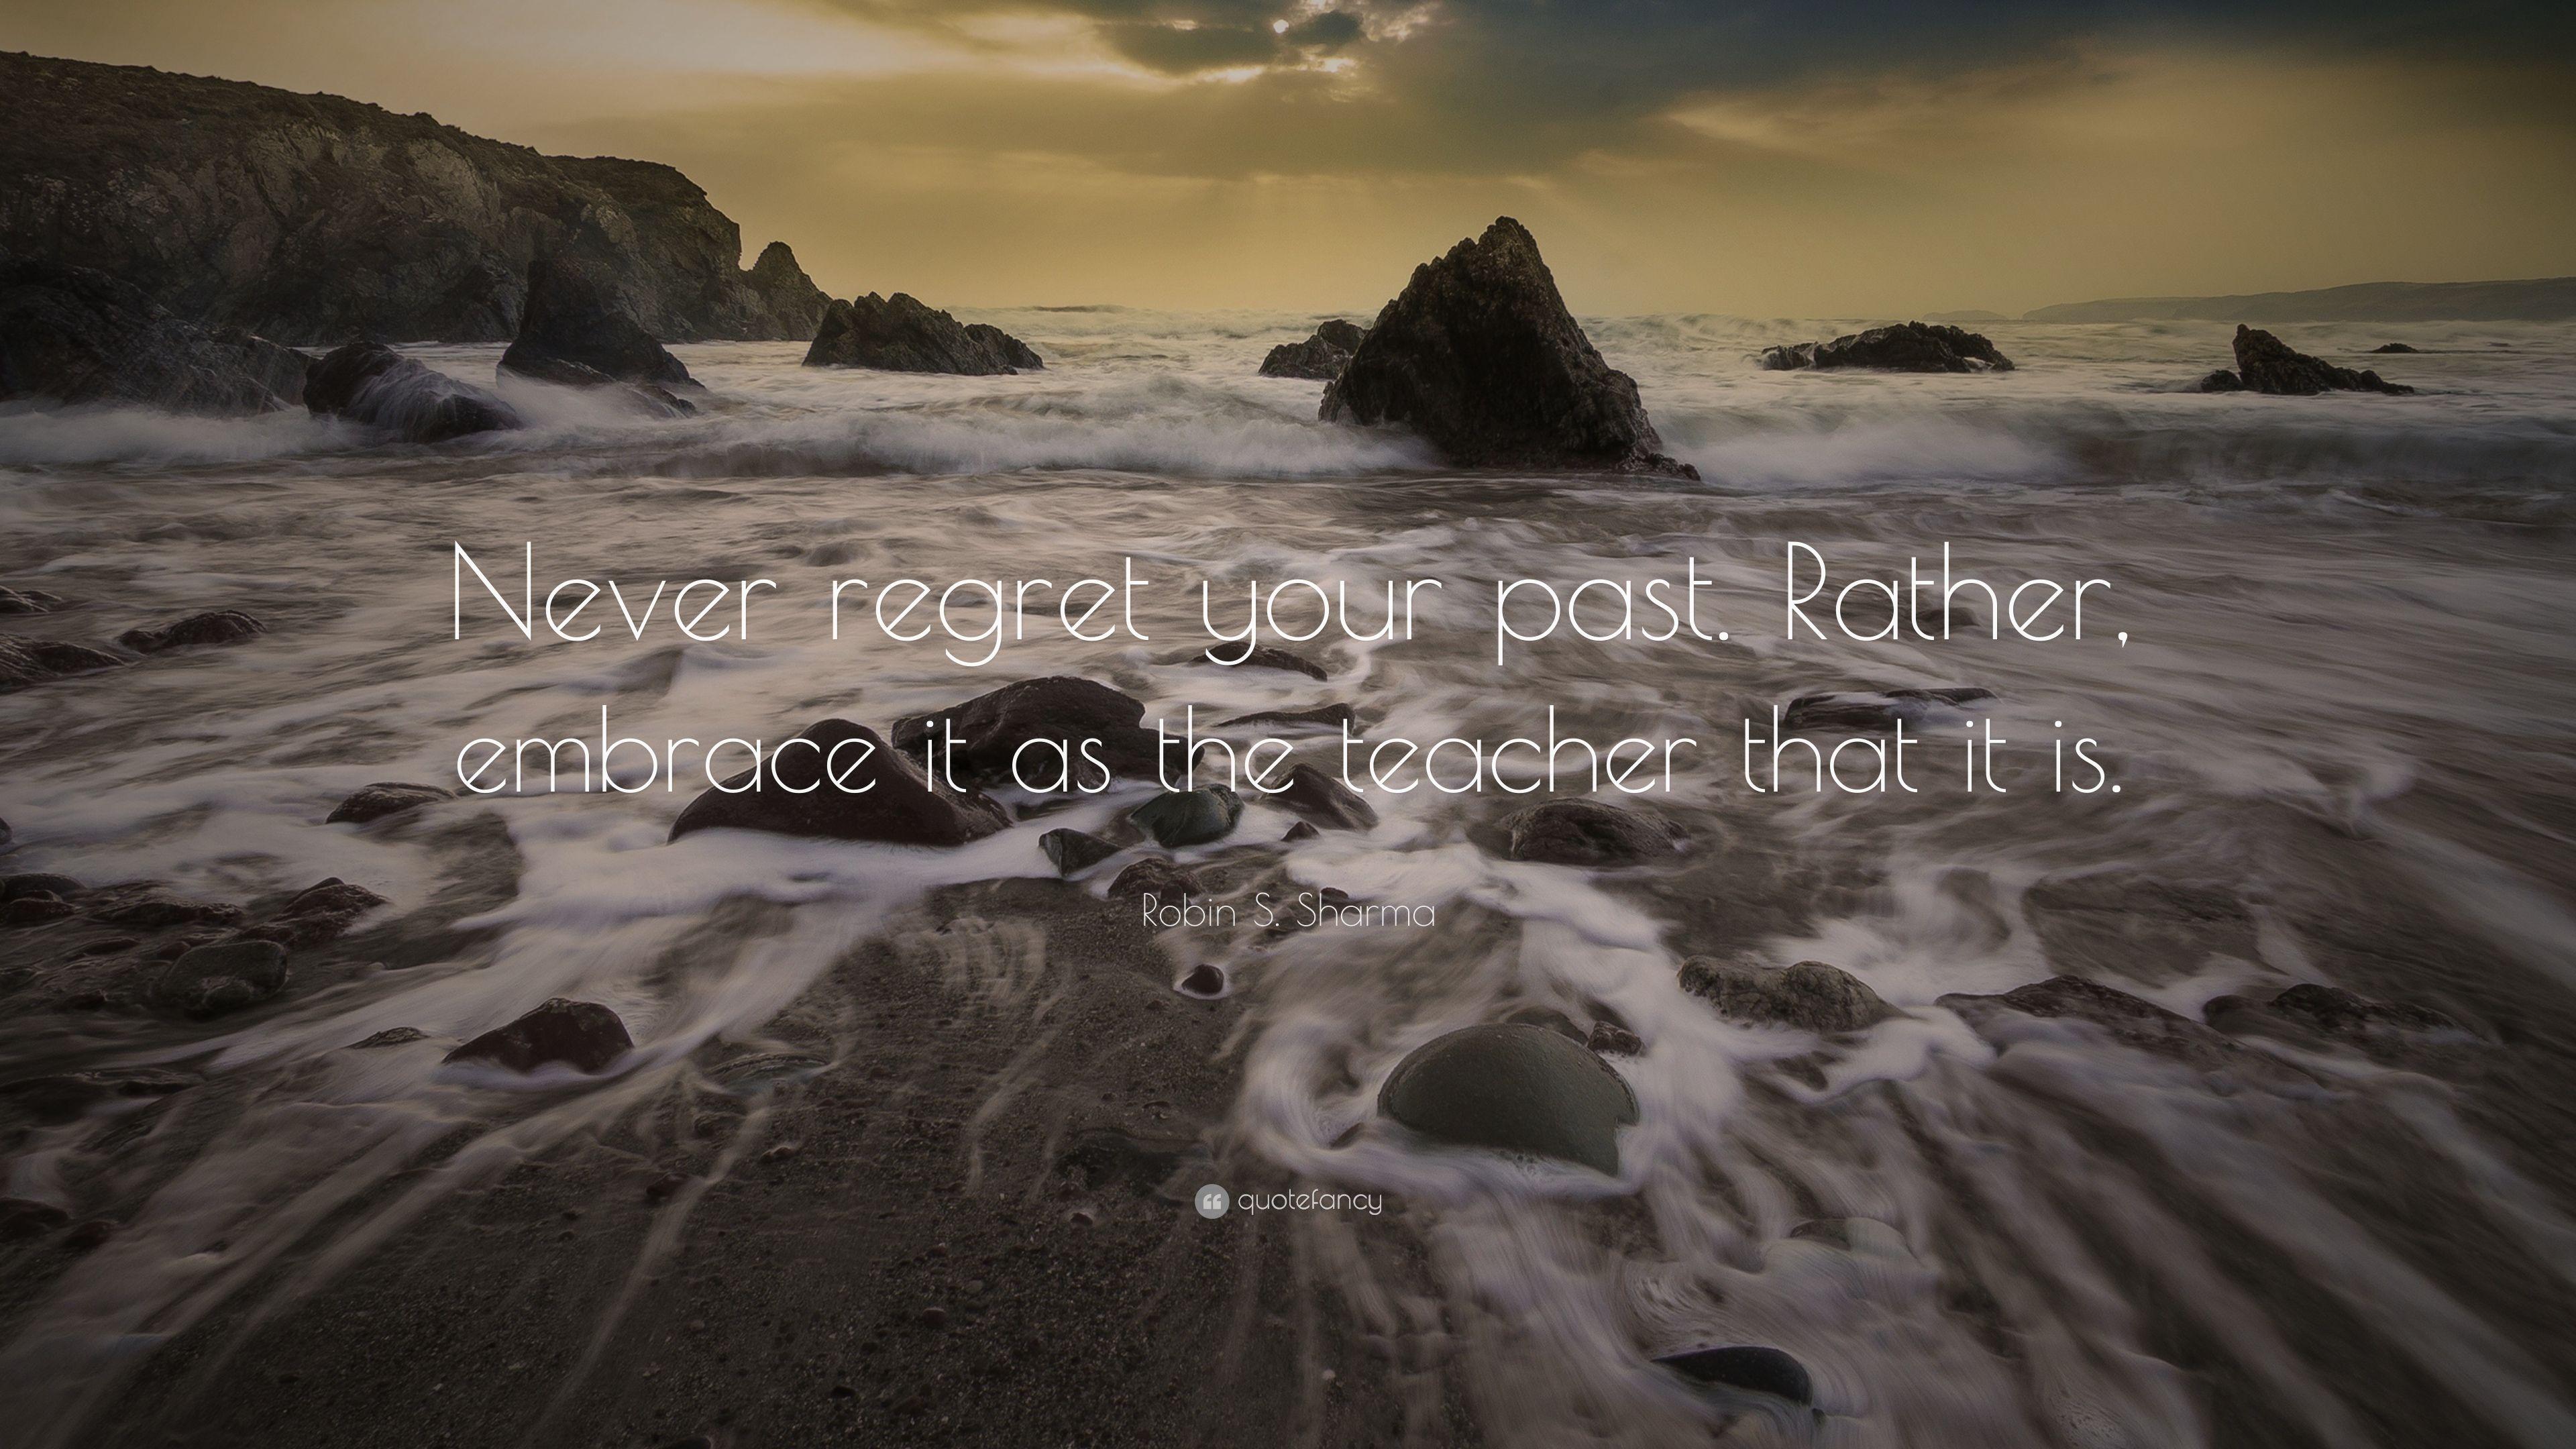 Robin S. Sharma Quote: “Never regret your past. Rather, embrace it